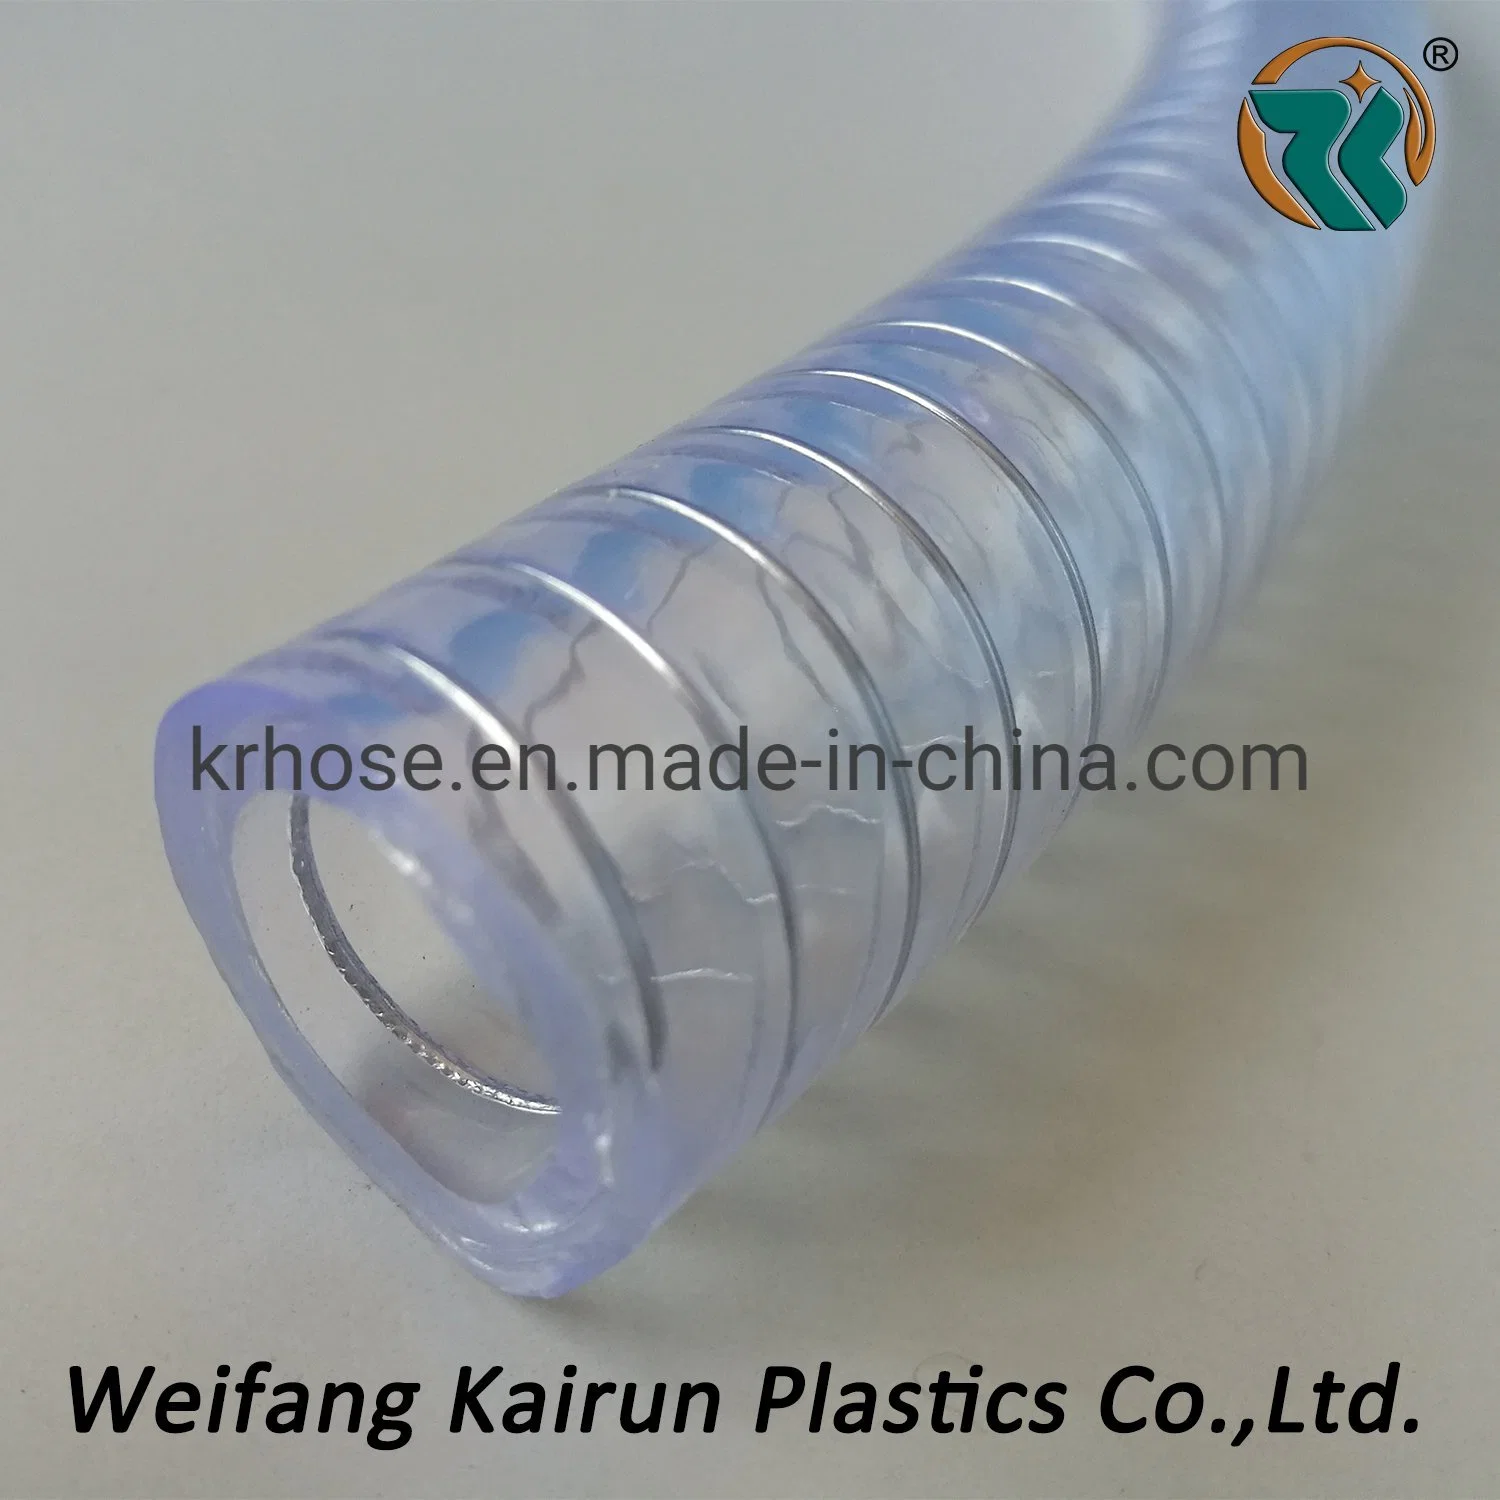 Industrial Clear Plastic PVC Tubing Steel Wire Reinforced PVC Tube Pipe Hose for Water Transfer